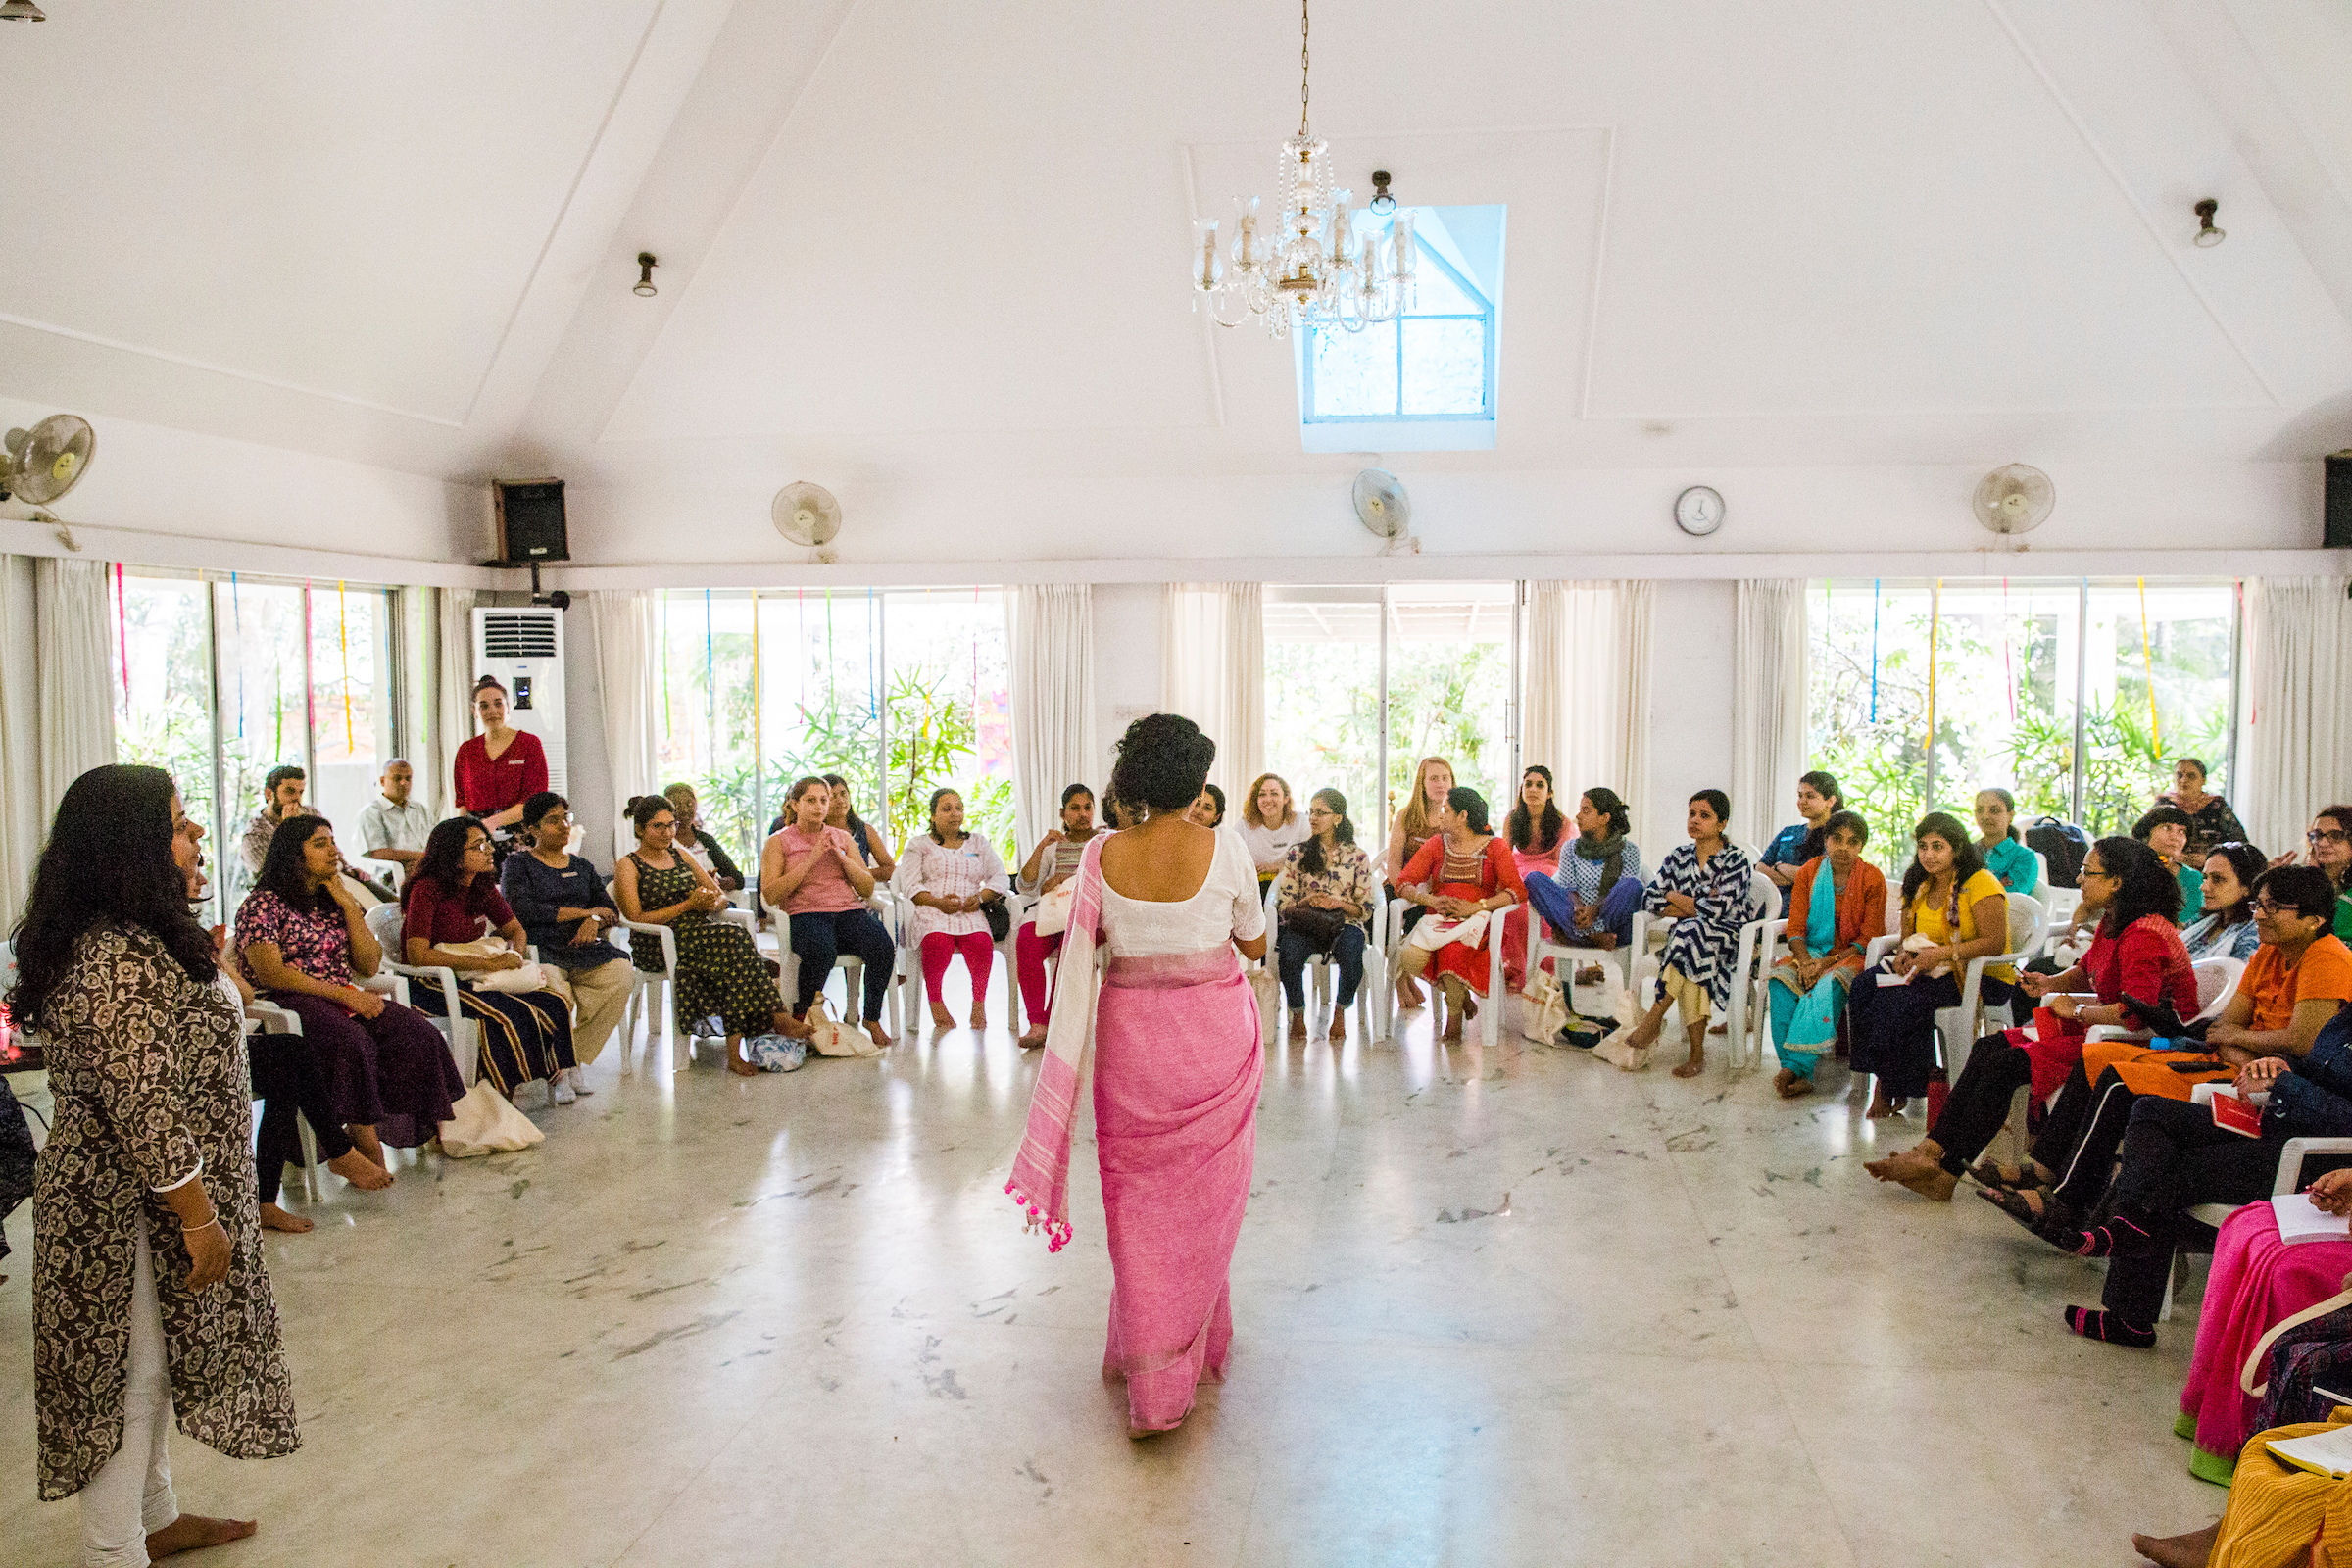 Preethi Herman addresses 30 new Changemakers, part of the She Creates Change program empowering women to start and lead social change campaigns across India. (© Change.org Foundation)